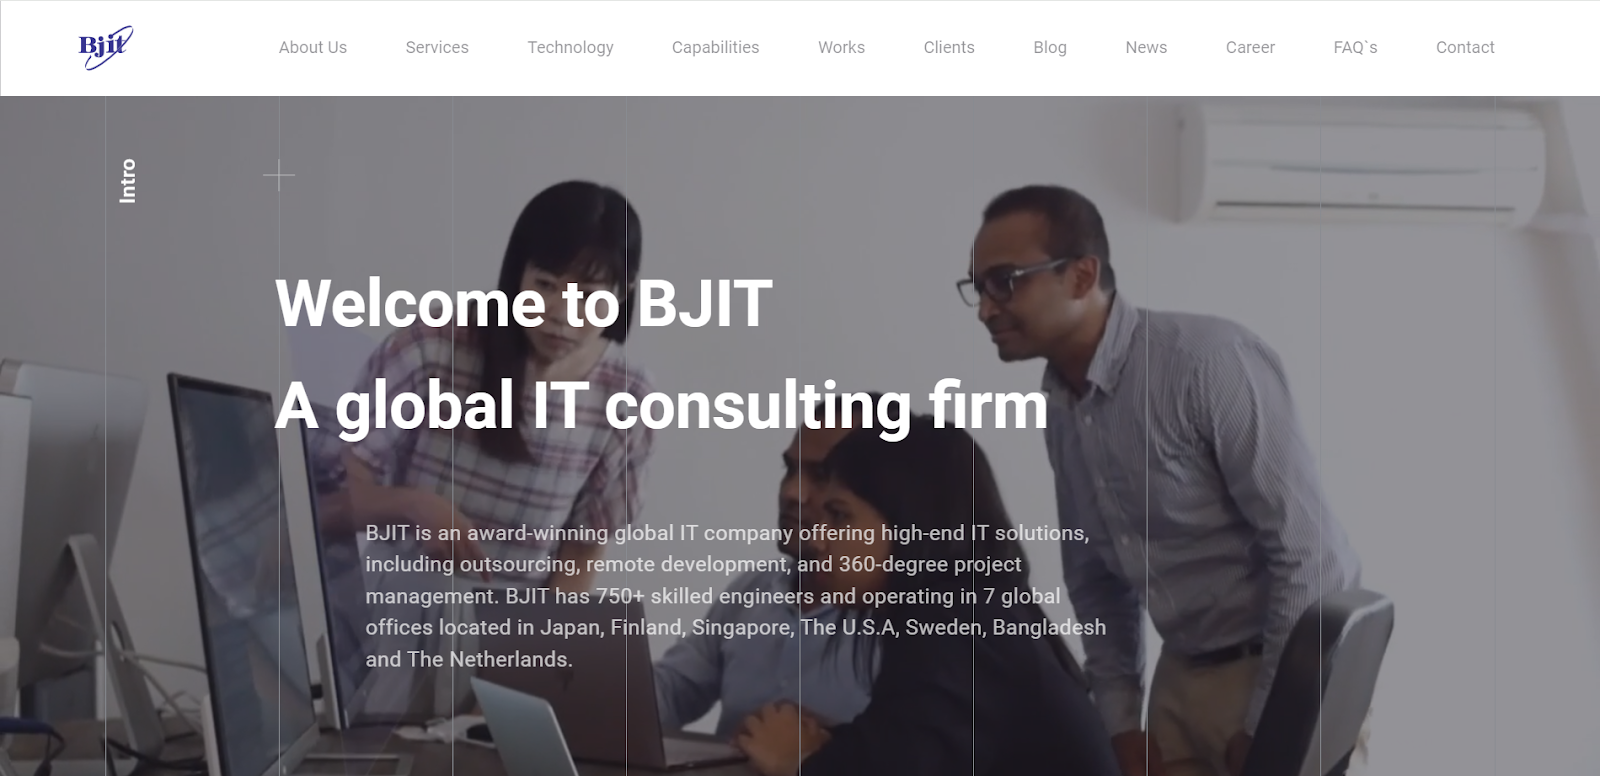 BJIT is a popular IT consulting firm in Bangladesh